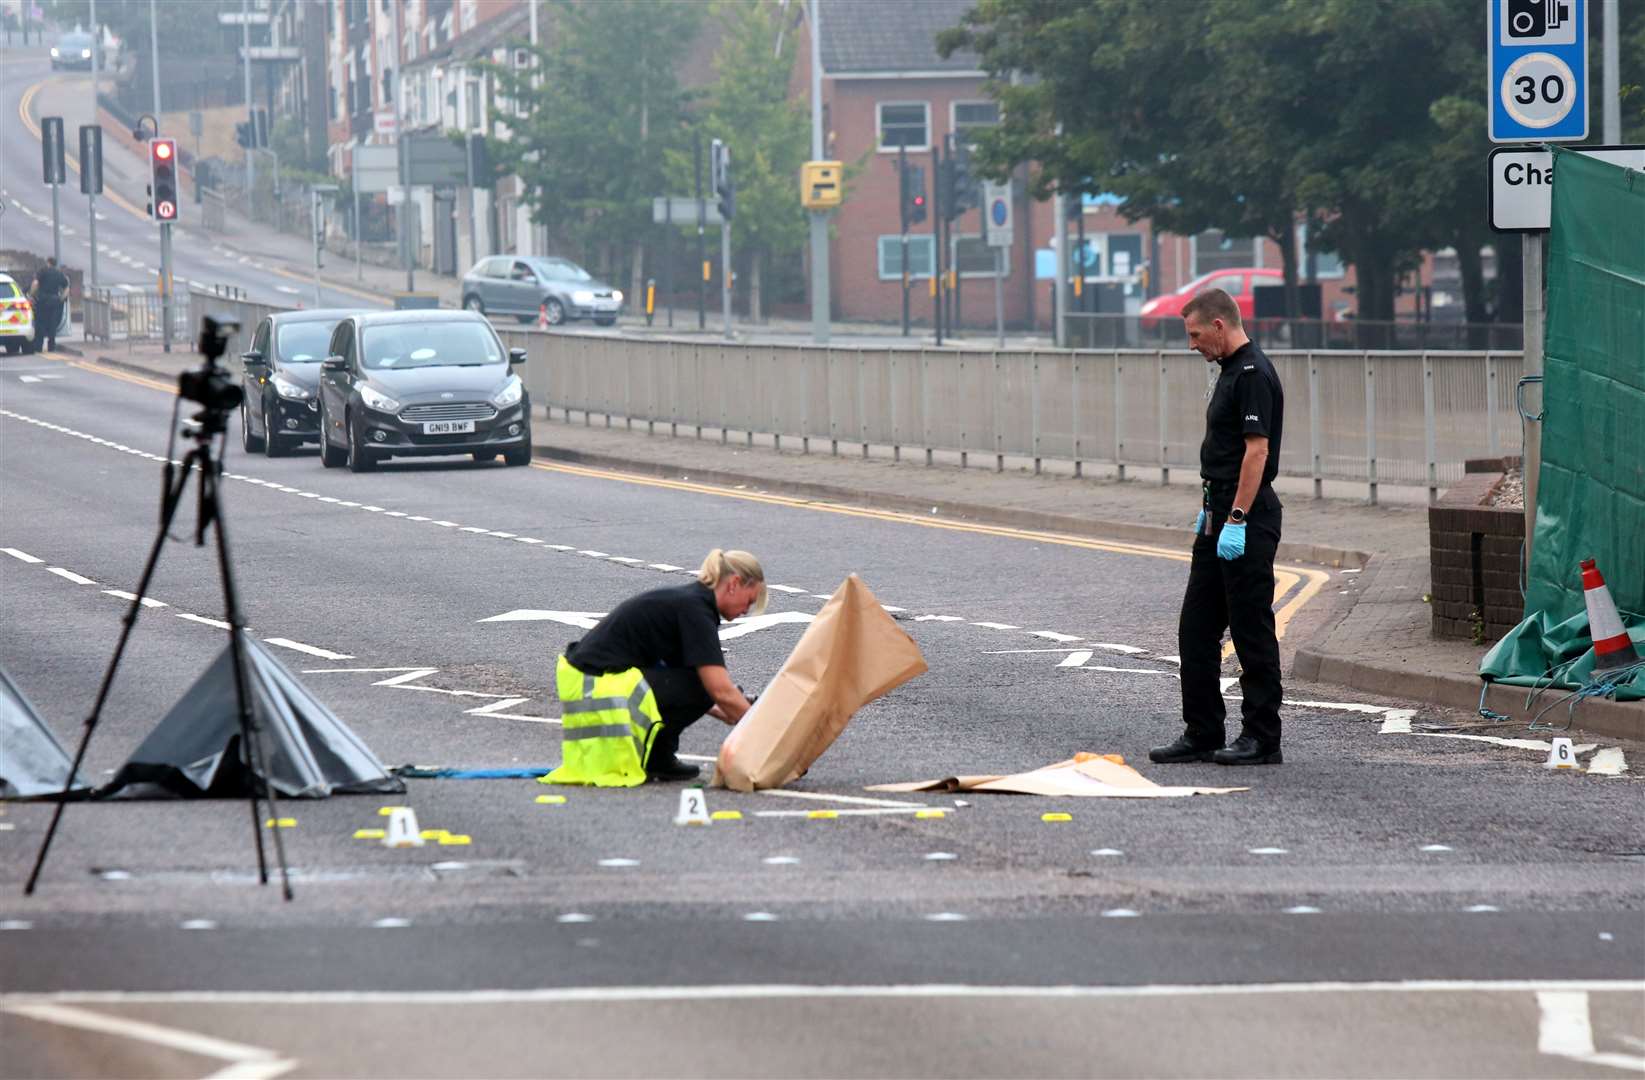 Police at the scene of a crash in New Road, Chatham. Images: UKNiP